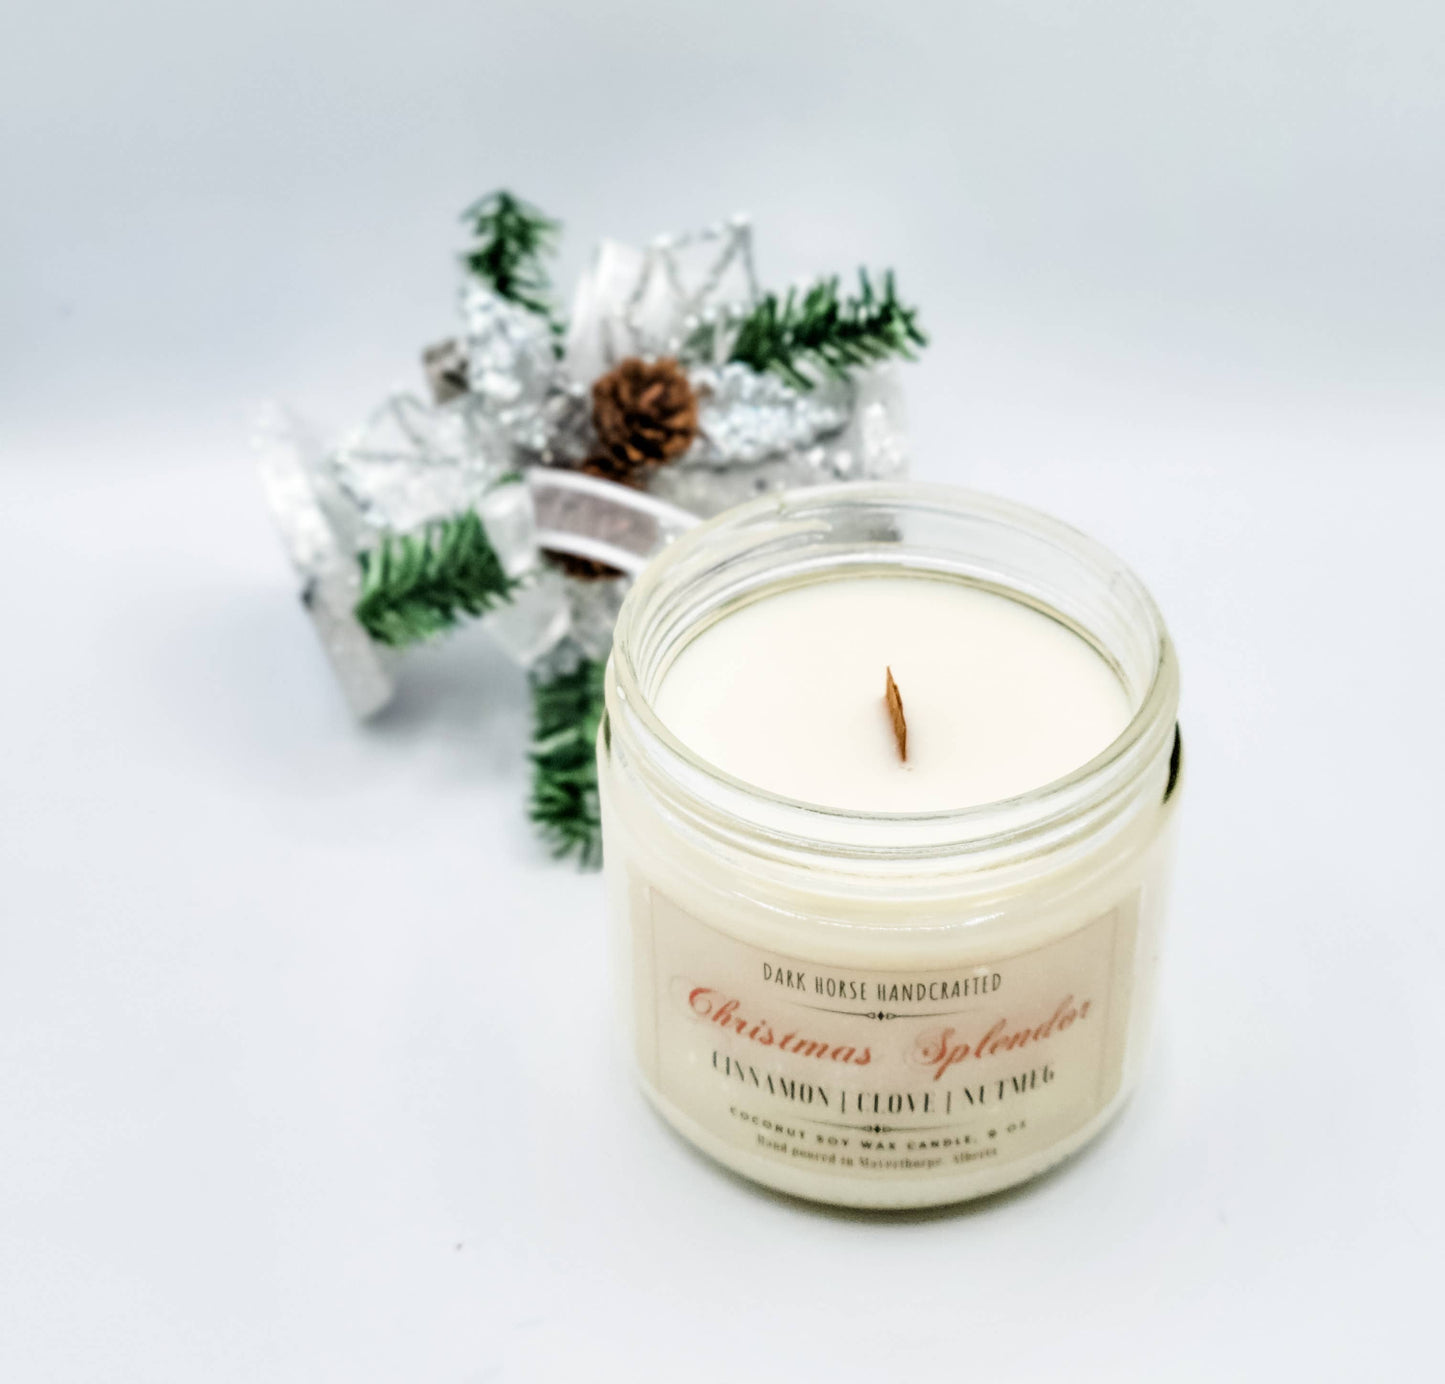 Christmas Splendor - Holiday, Natural Coconut Soy Candle